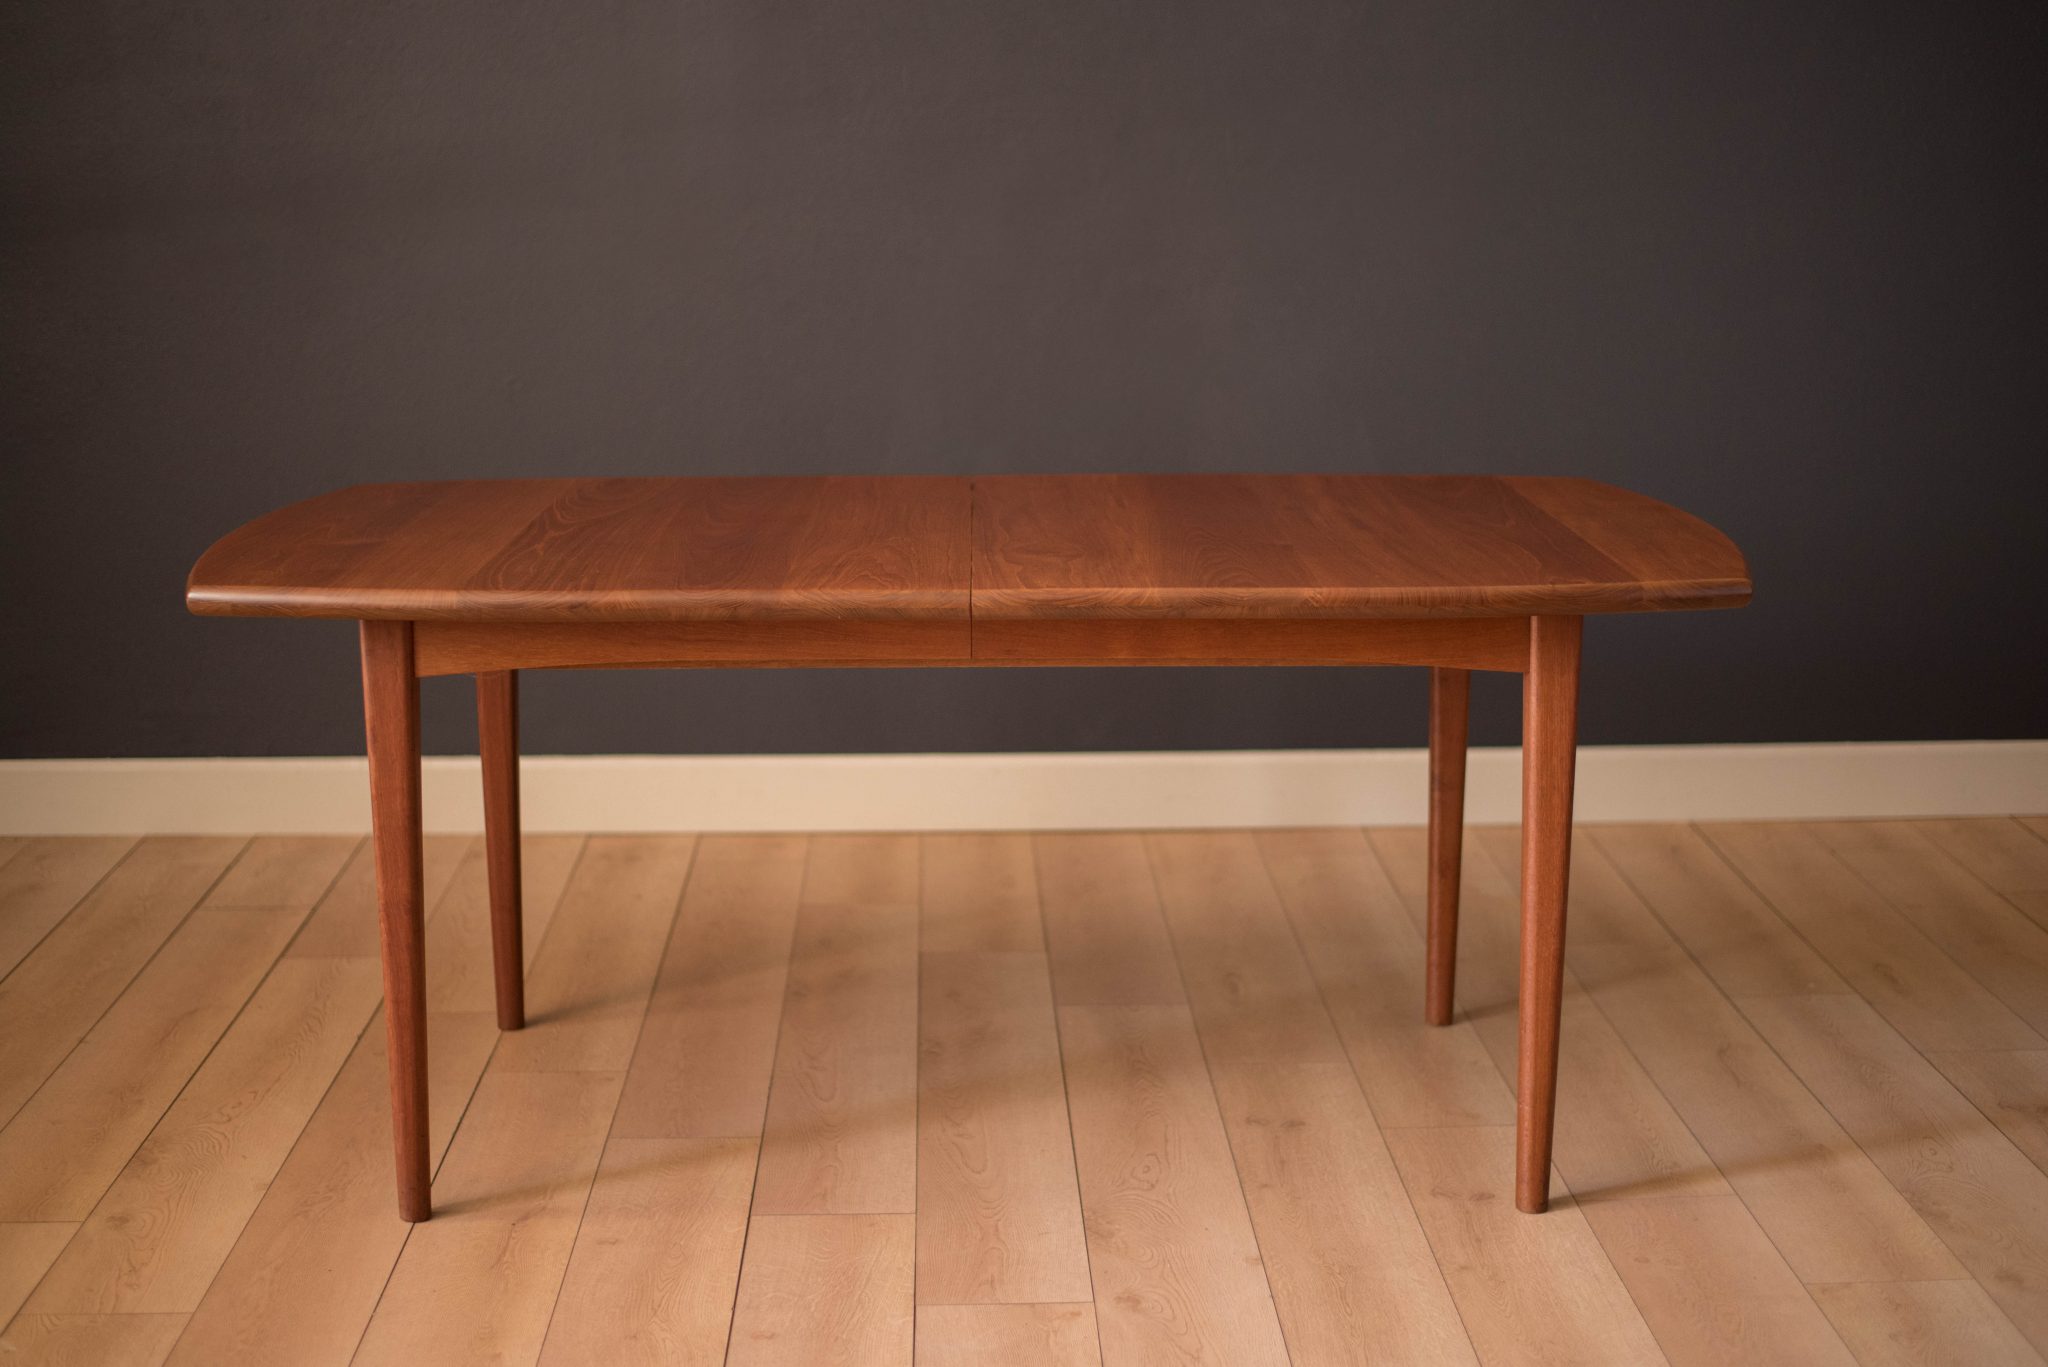 Teak Dining Table With Glass Top: A Blend Of Traditional And Modern